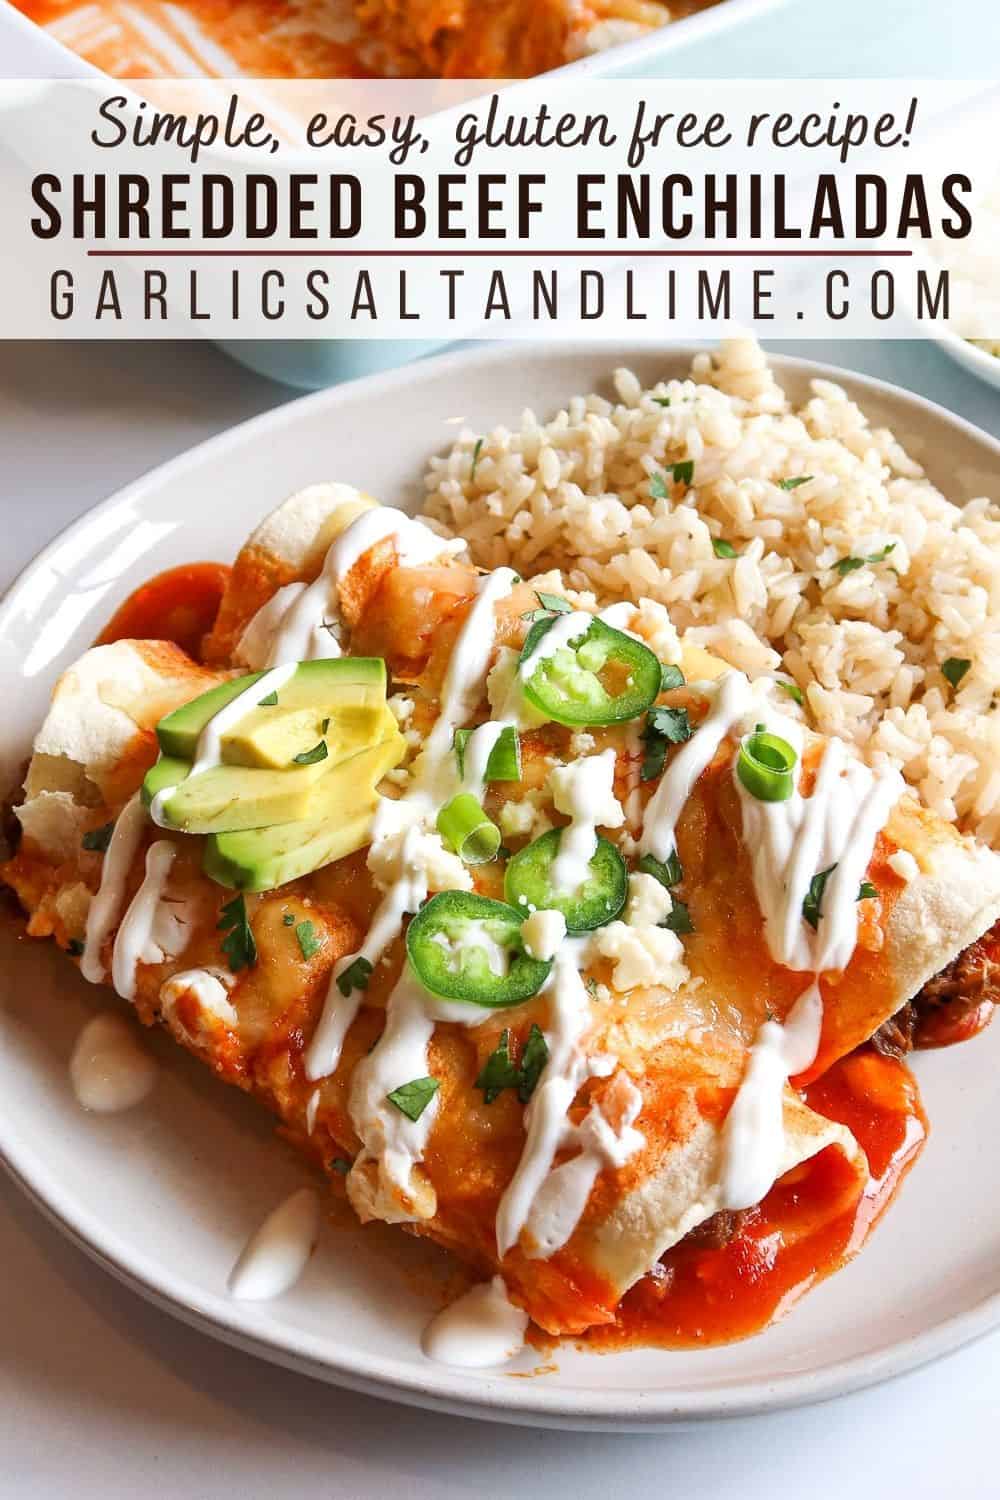 Two plated enchiladas with toppings and text overlay for Pinterest.